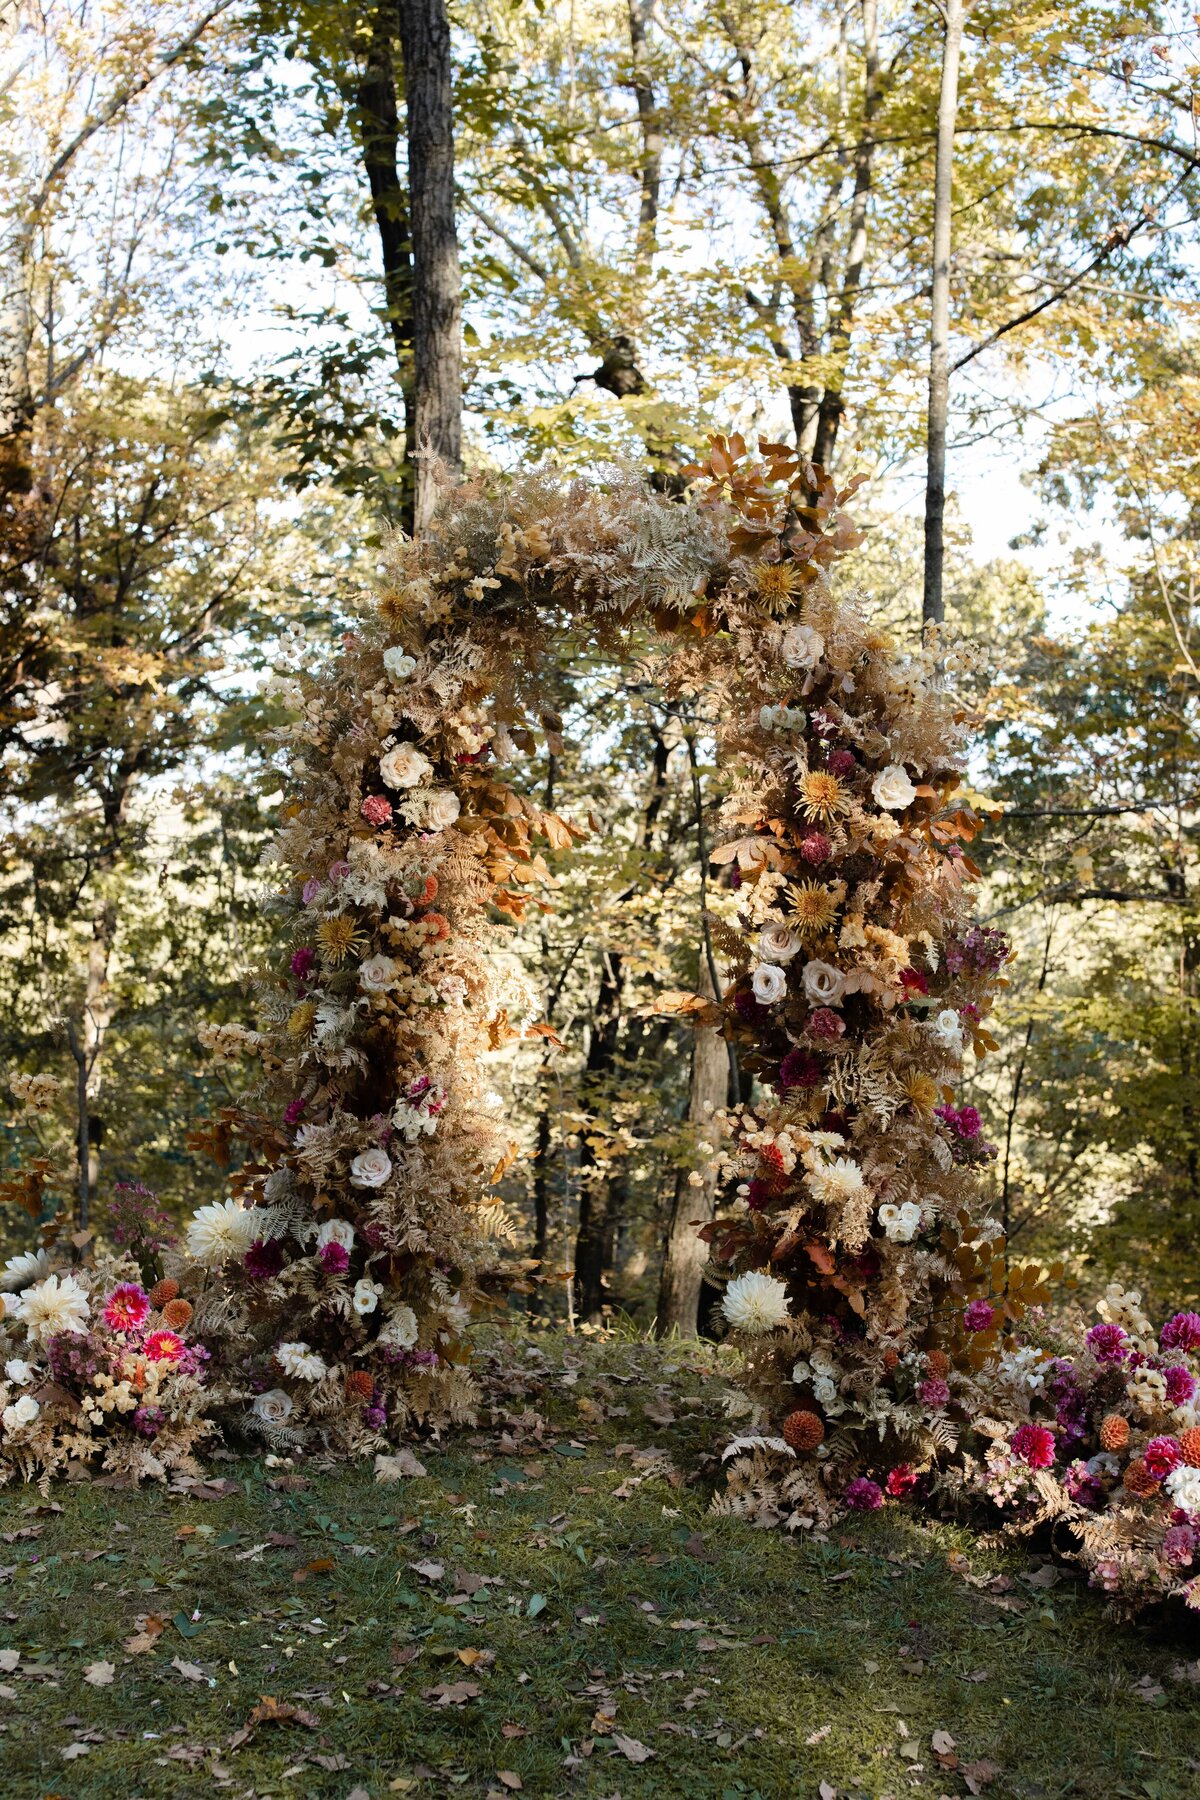 Romantic floral statement design on wedding ceremony arbor outside in wooded area.